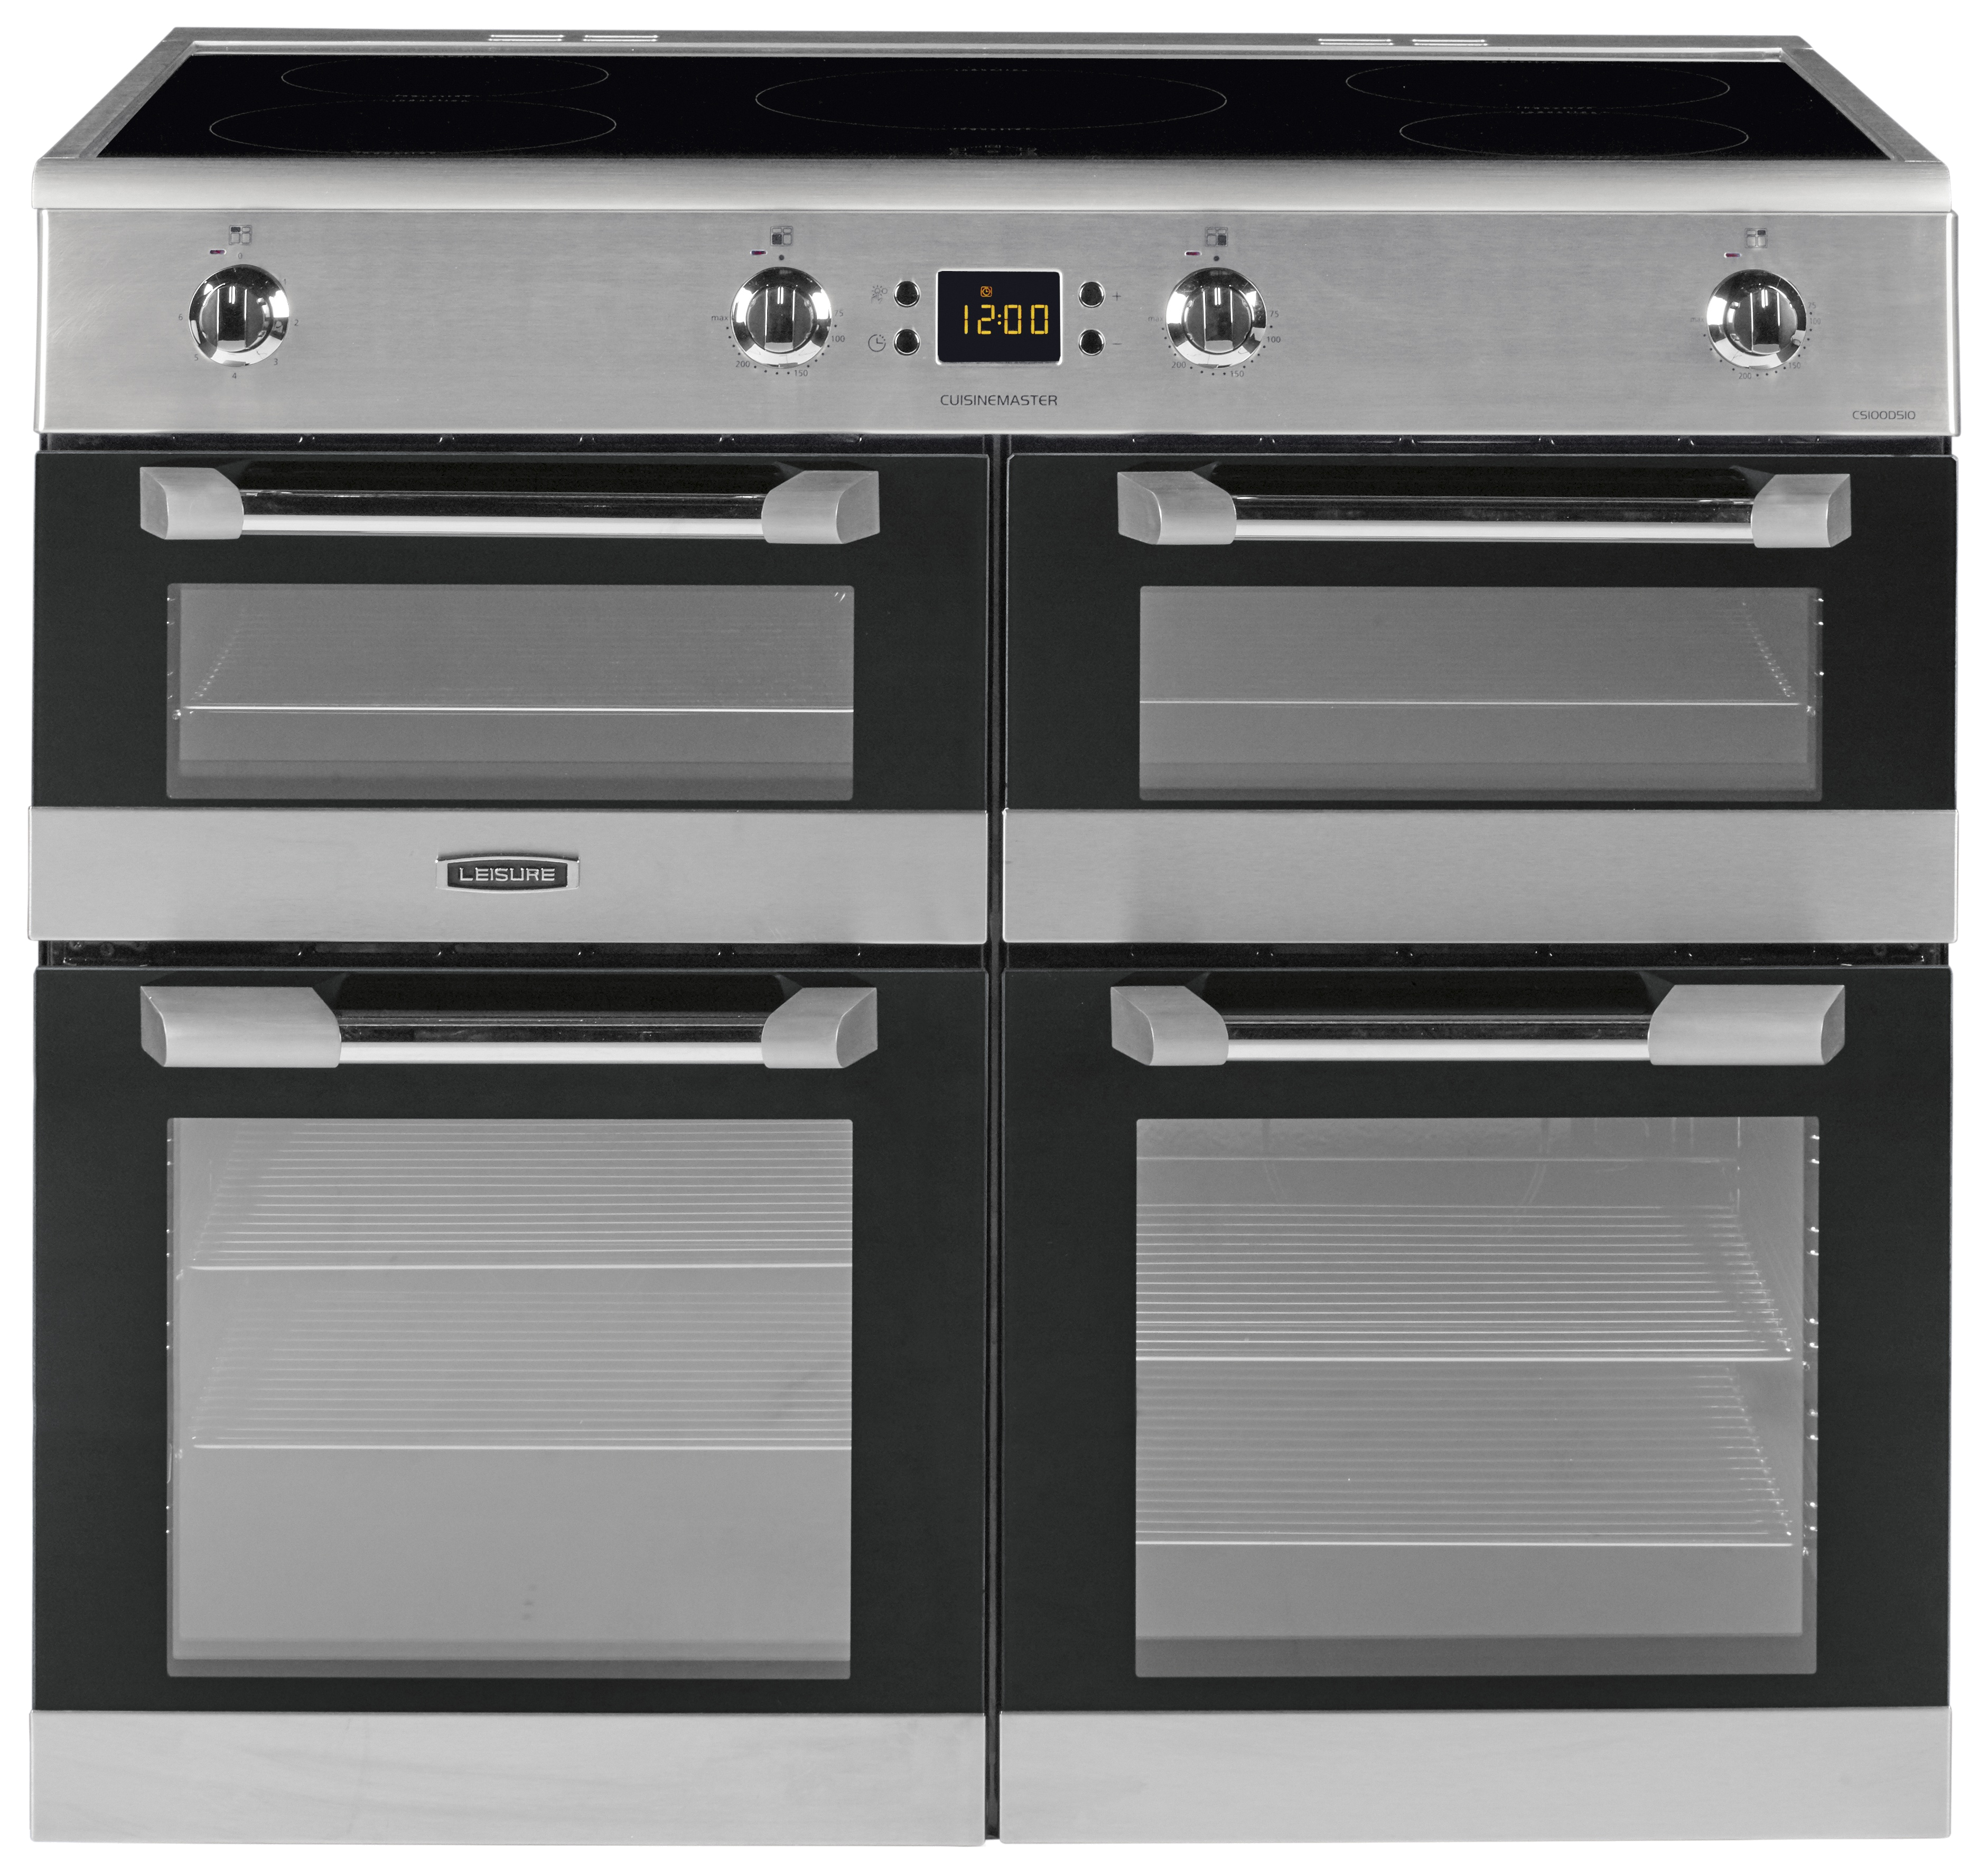 Image of Leisure Cuisinemaster 100cm Induction Range Cooker - Stainless Steel